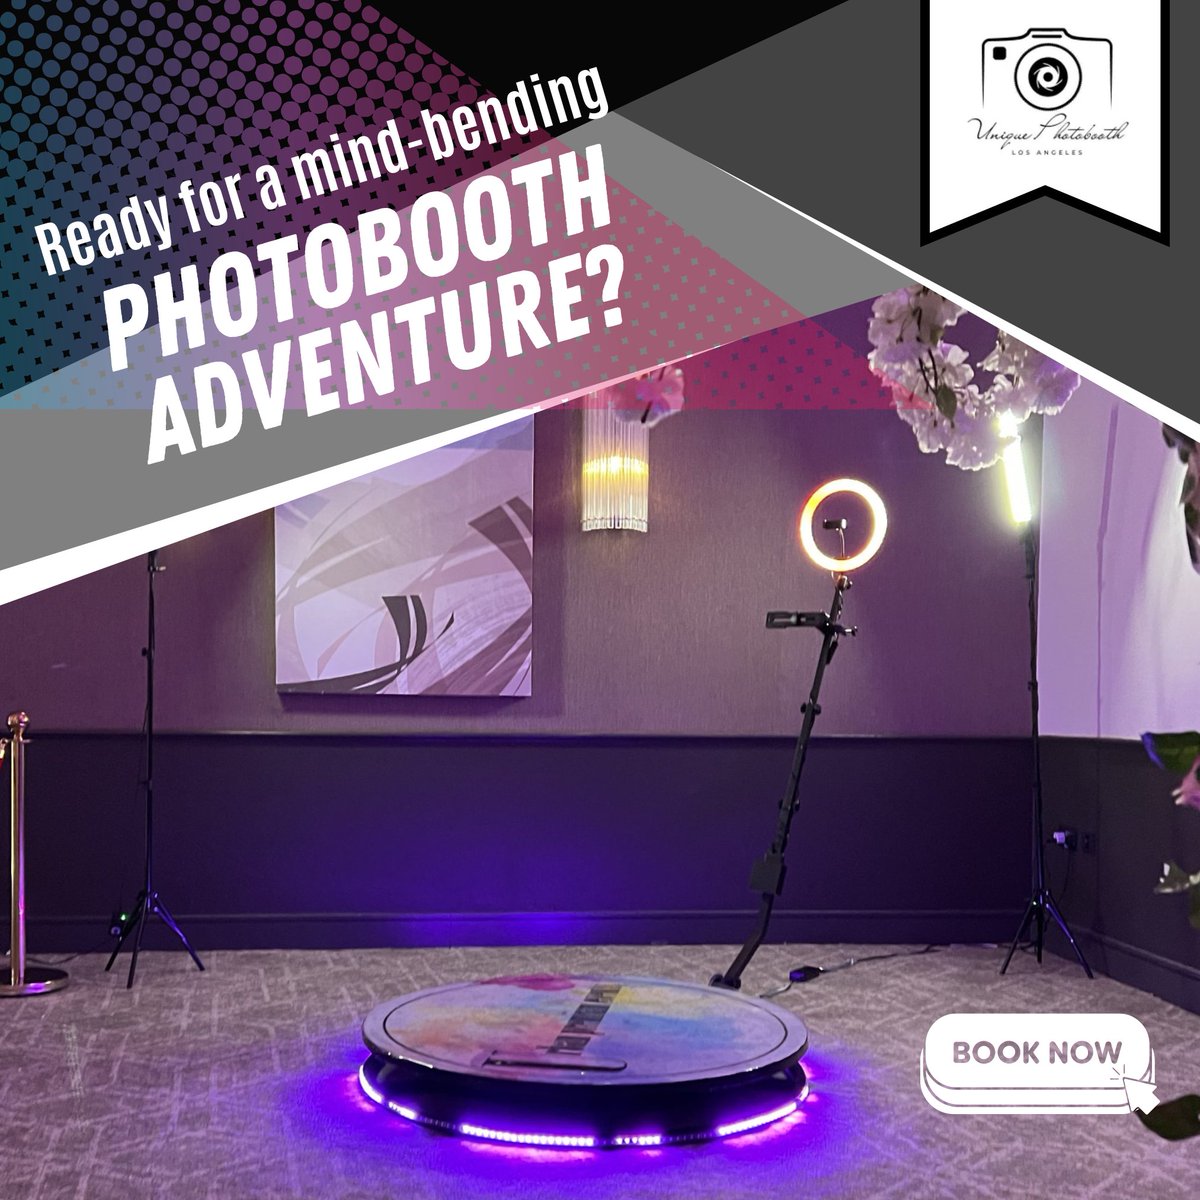 Prepare to be amazed! Our 360 Video Photobooth is a whole new level of photobooth fun. Let's get the party started! #360photobooth #photoboothrental #partyrental #eventphotobooth #photoboothforrent #photobooth #Losangeles #balloons #flowers #SanFernandovalley #audioguestbook